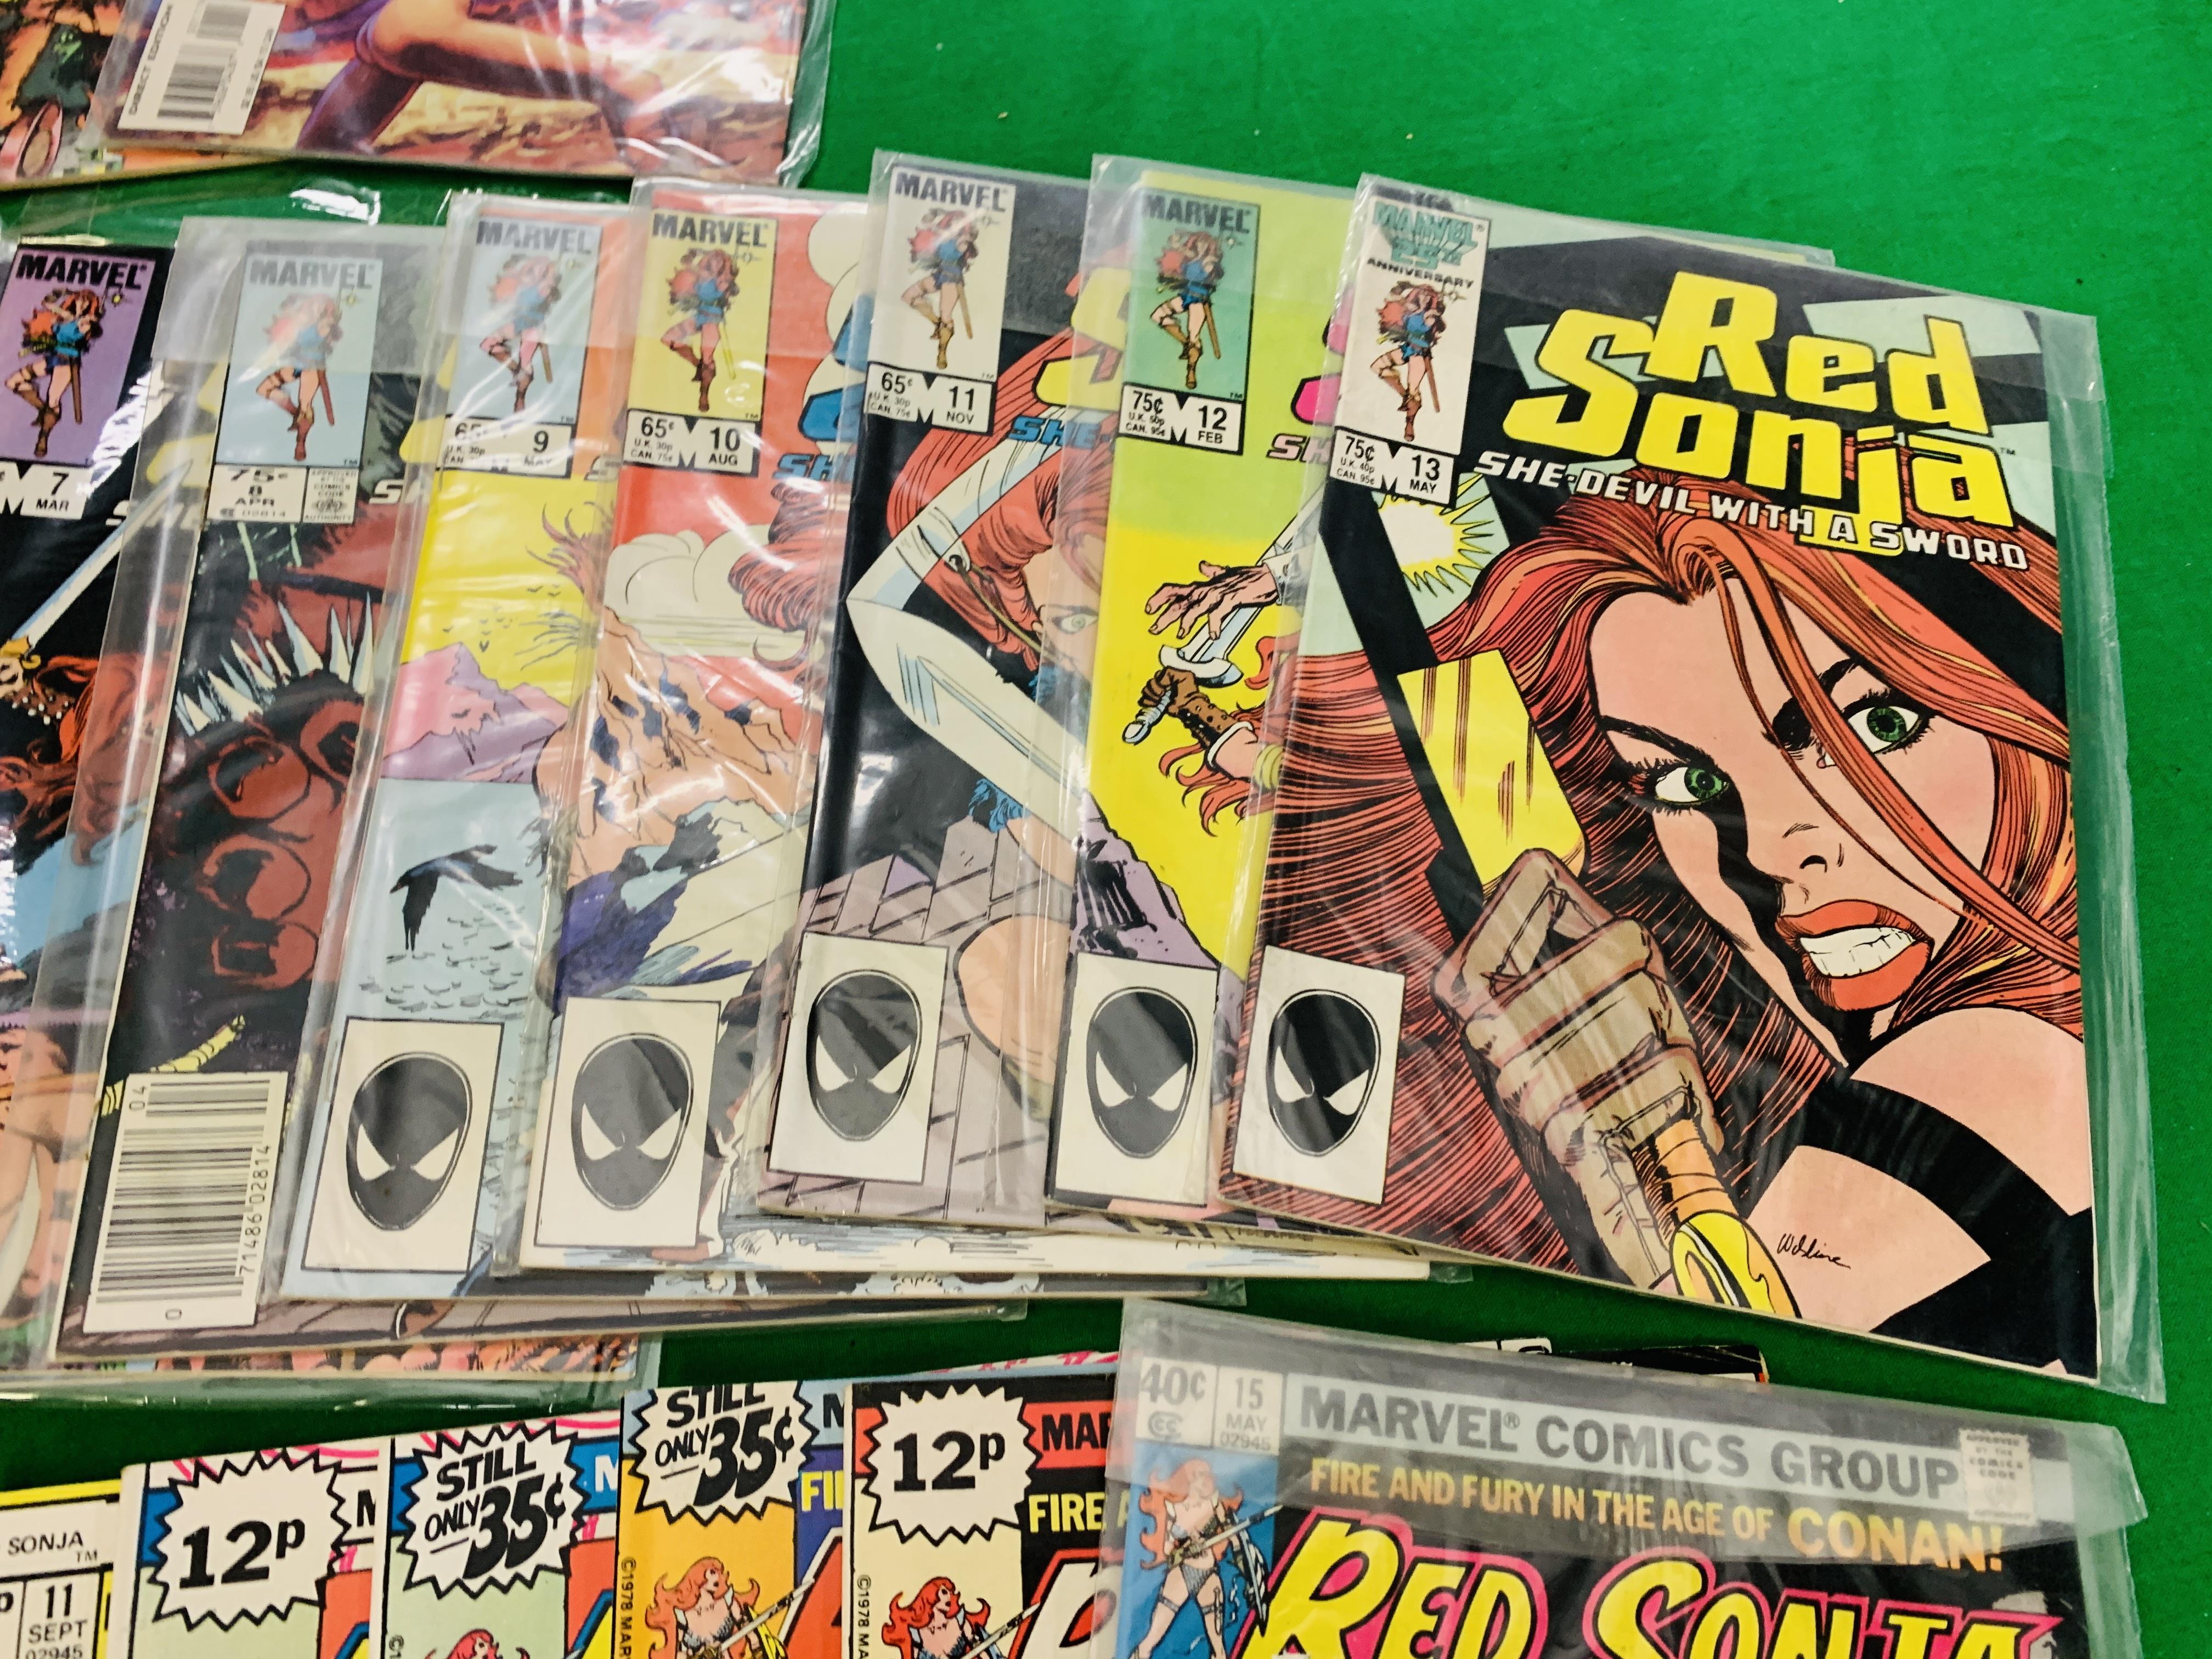 MARVEL COMICS RED SONJA NO. 1 - 15 FROM 1977 AND NO. 1 - 13 FROM 1983, INCLUDING OTHER APPEARANCES. - Image 7 of 8